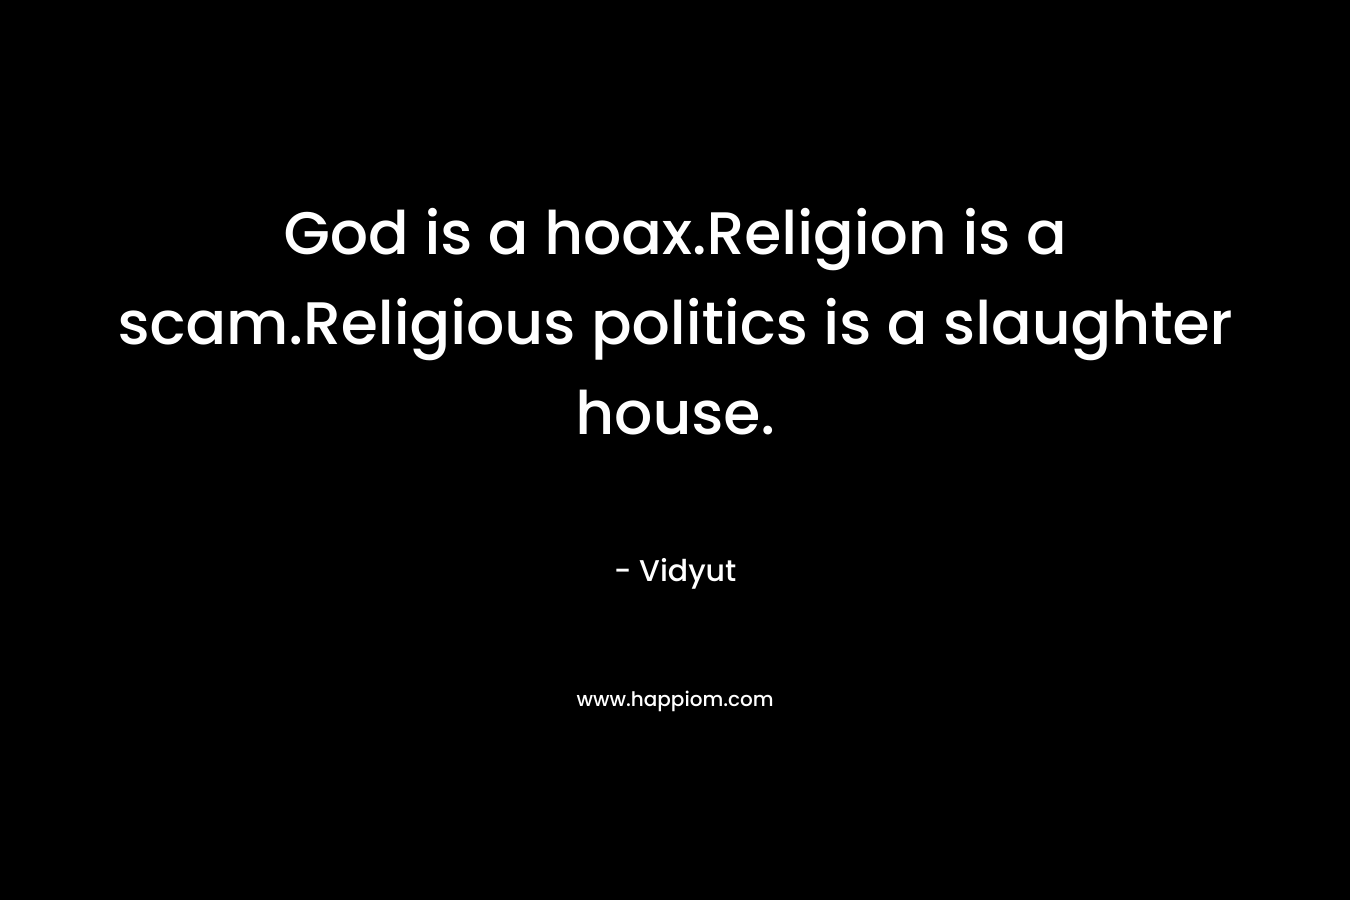 God is a hoax.Religion is a scam.Religious politics is a slaughter house.